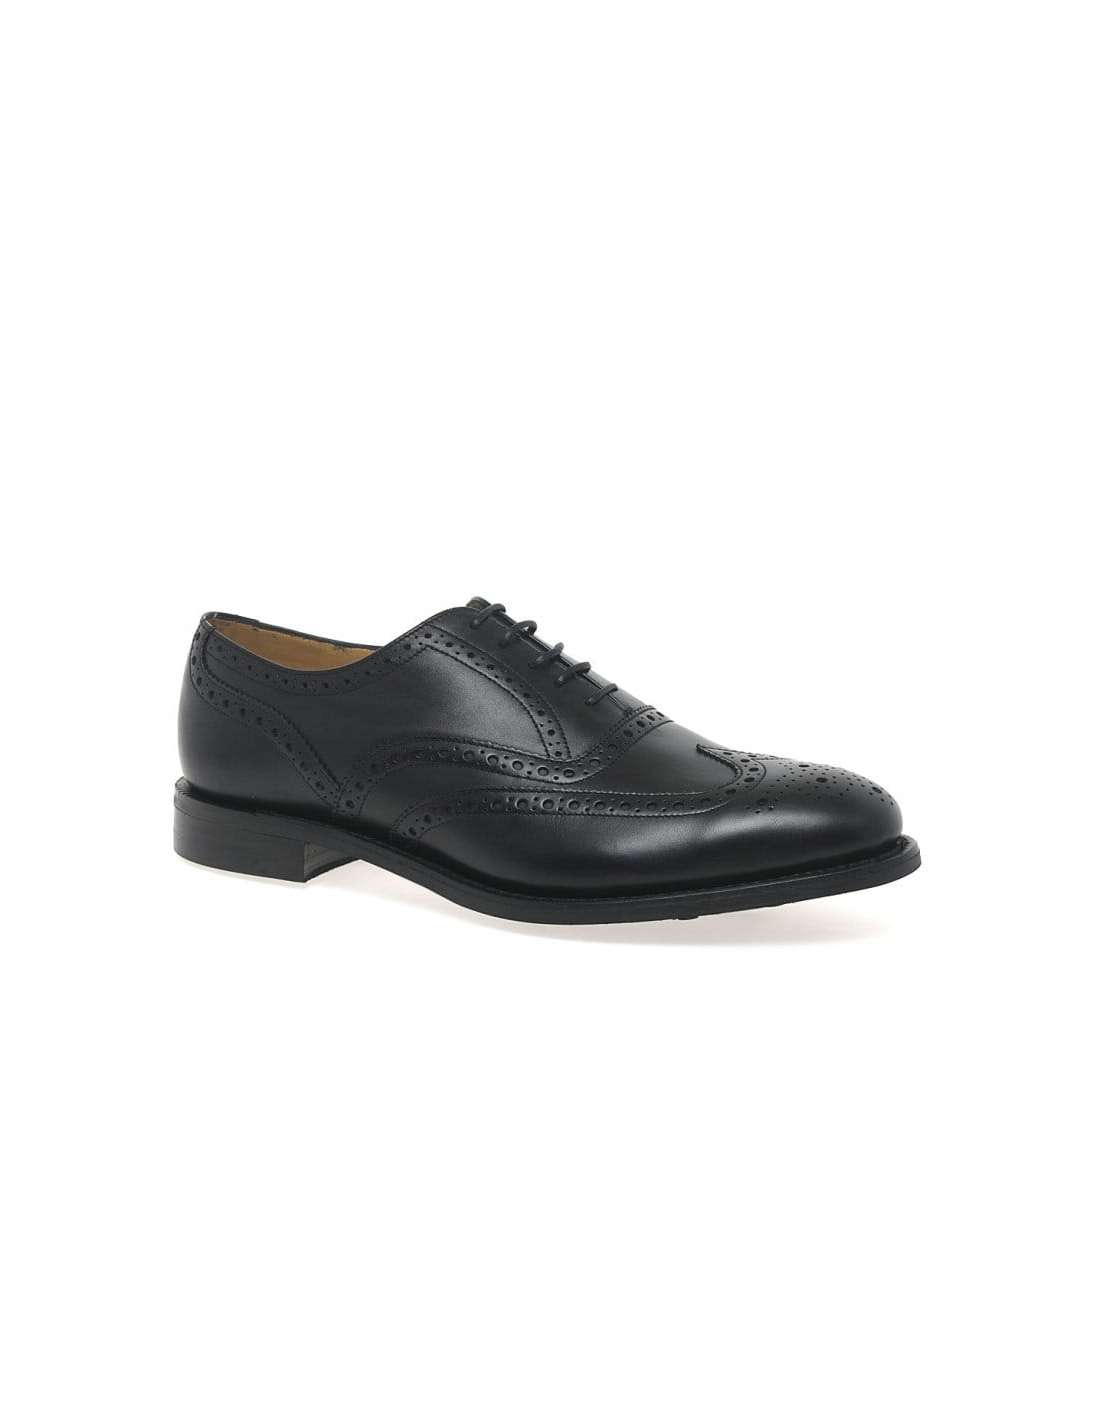 cumbria oxford shoes by Loake Shoemakers